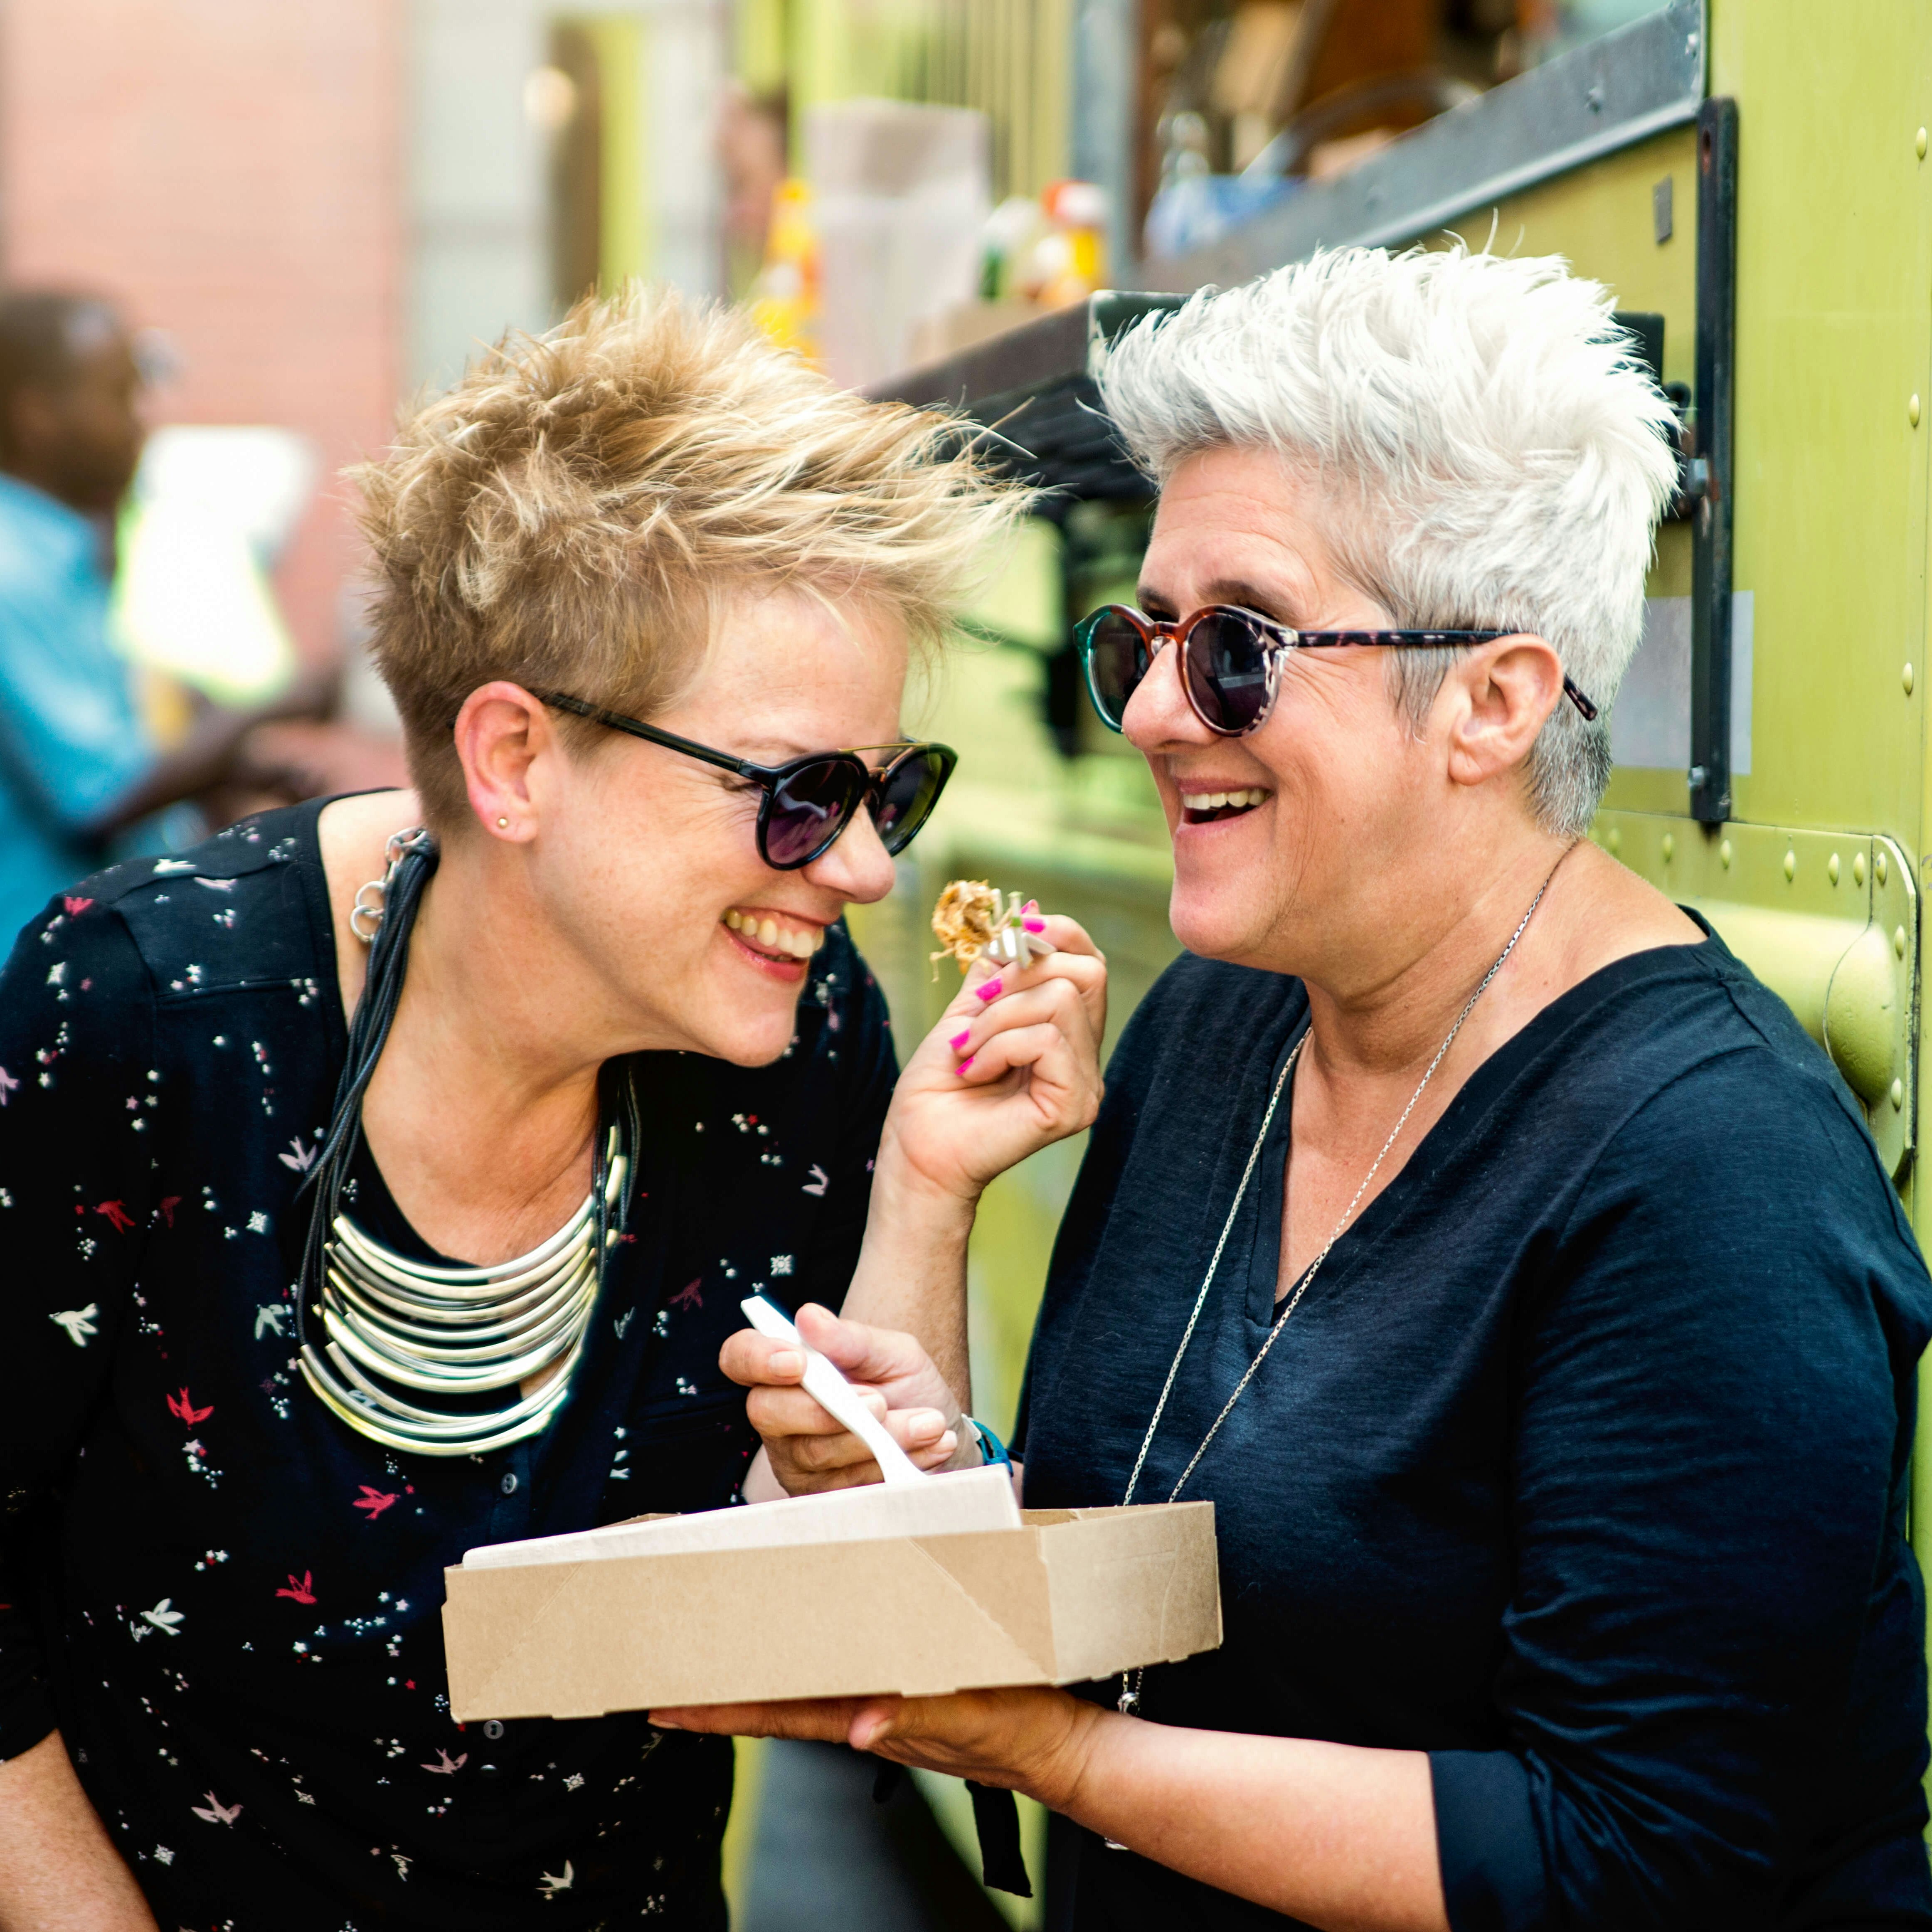 Couple of mature women enjoying their food from a food truck in city street.